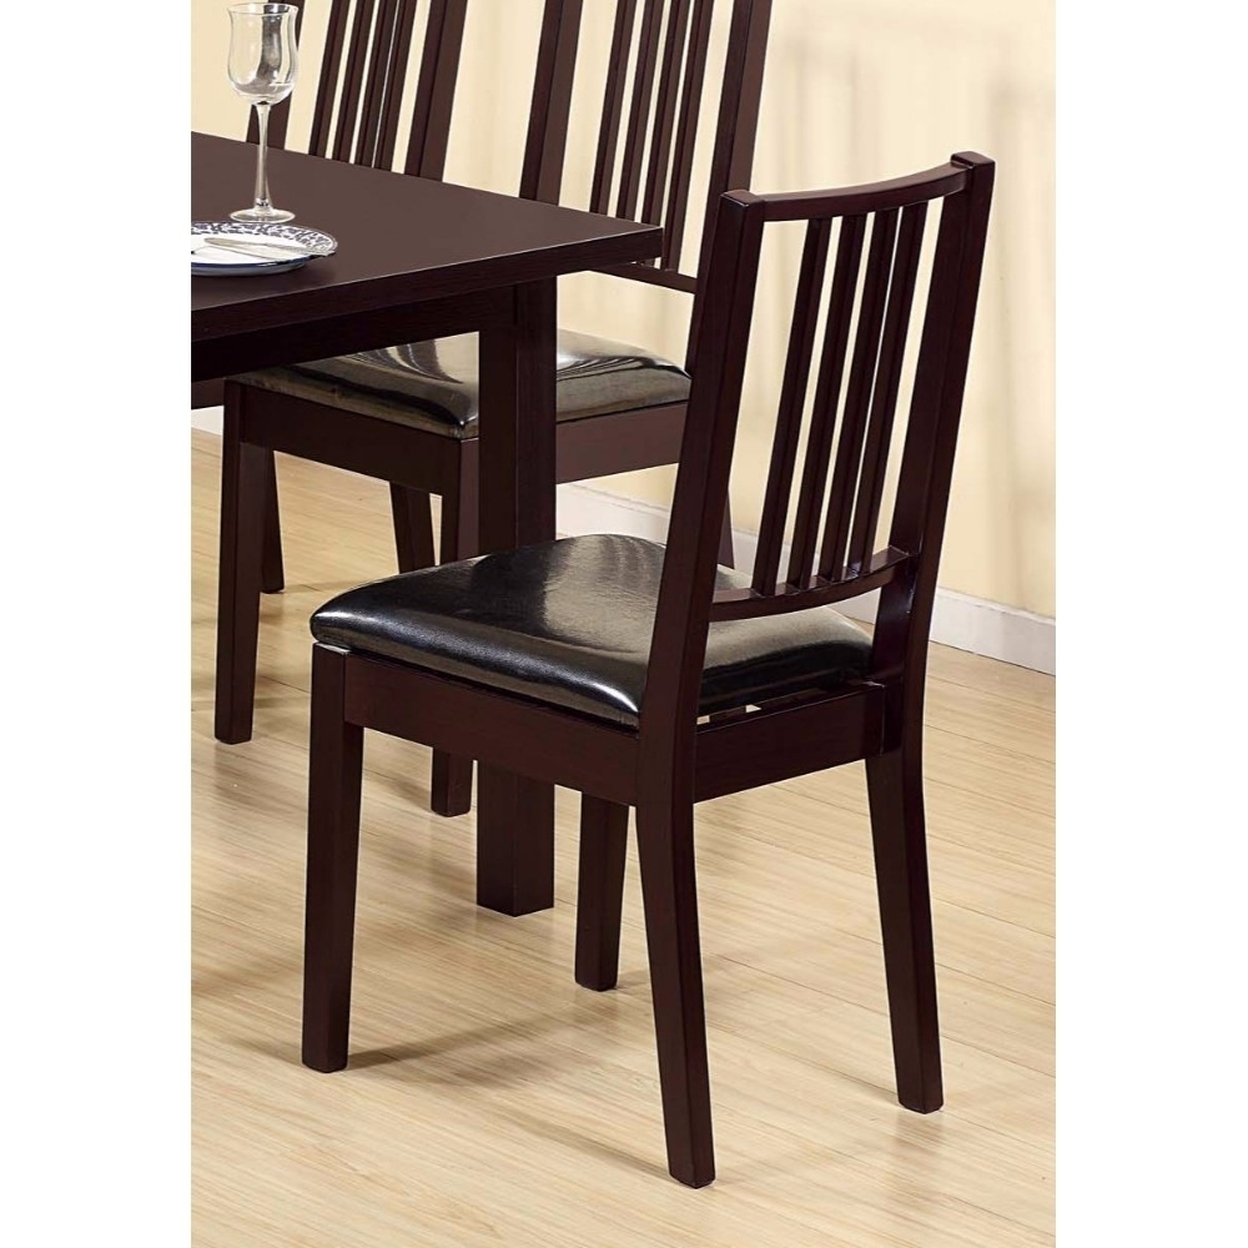 Comfortable Dining Chair With Lustrous Finish Seat, Dark Brown | eBay